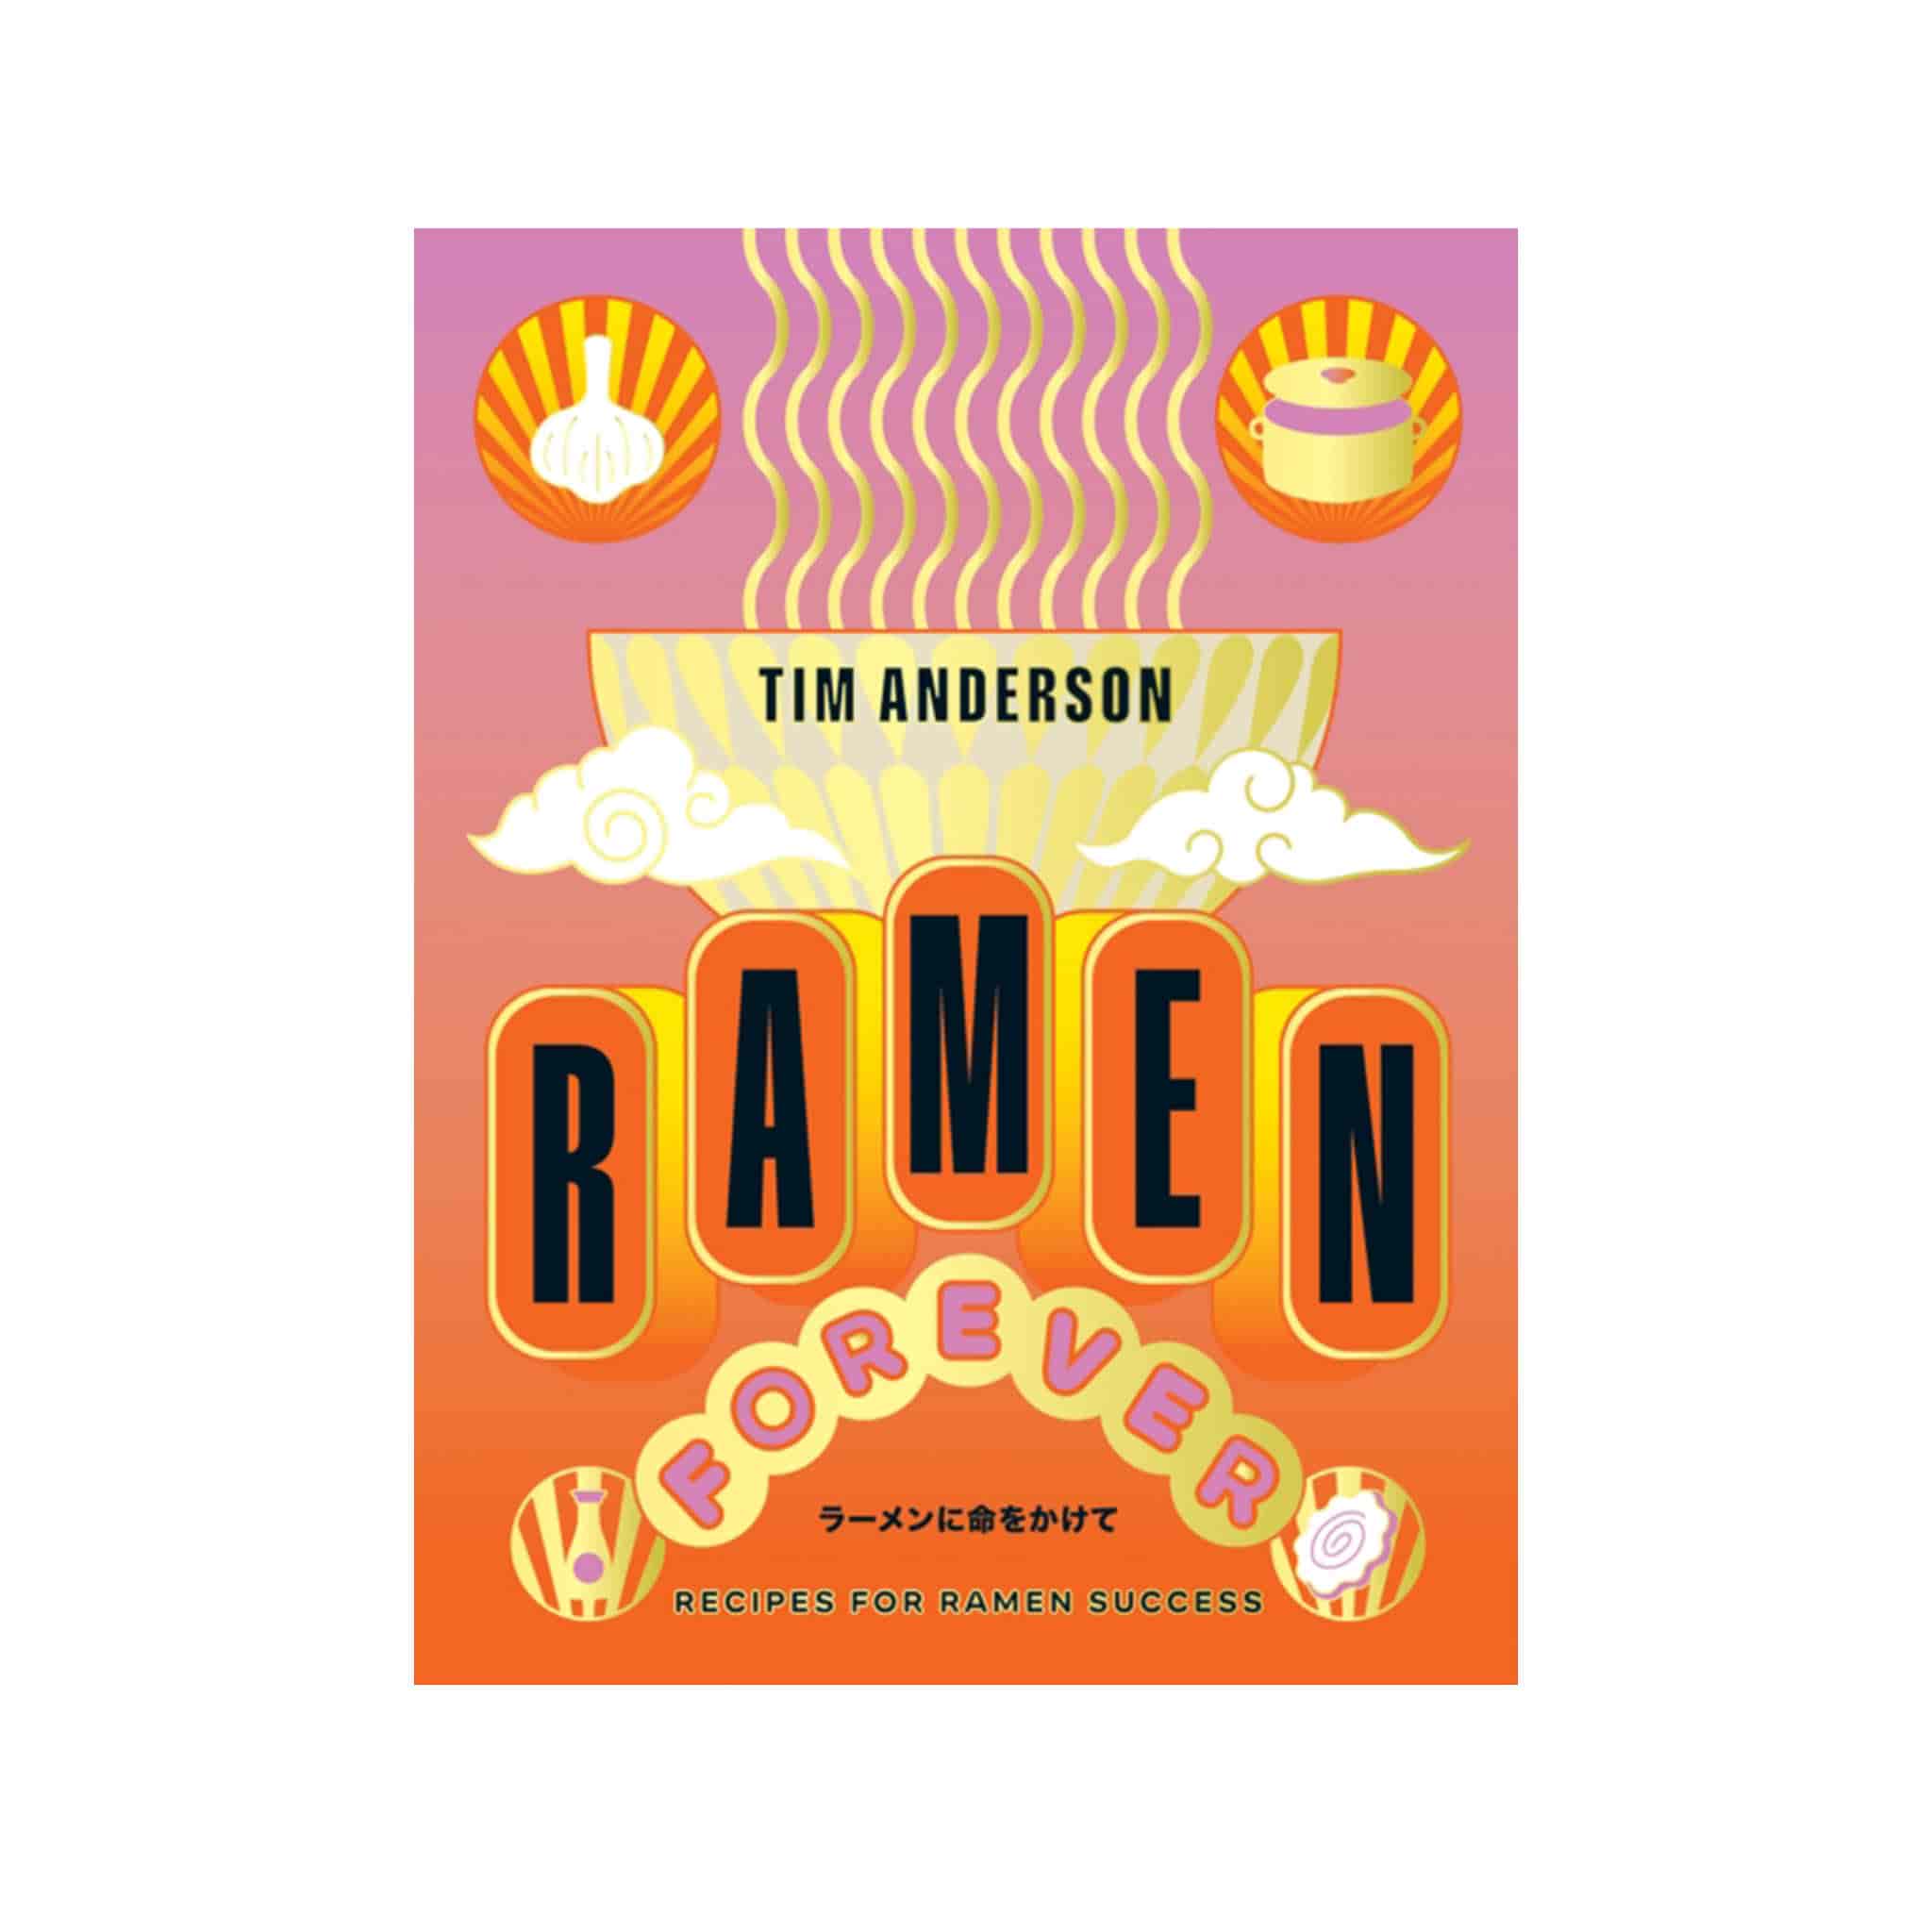 Ramen Forever, by Tim Anderson